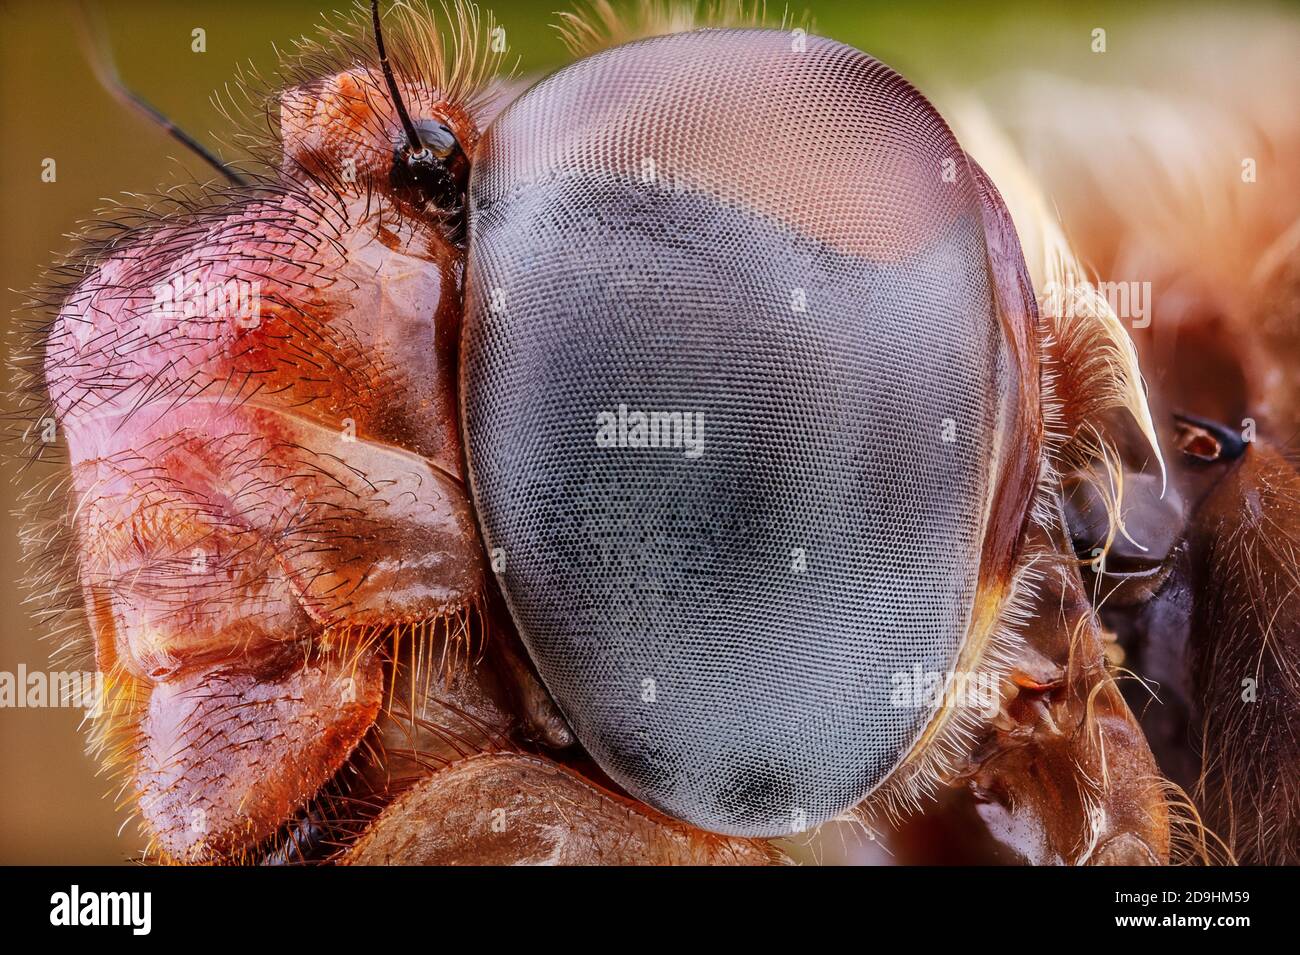 Compound Eye, Cardinal Meadowhawk Dragonfly Close-Up, Sympetrum illotum Banque D'Images